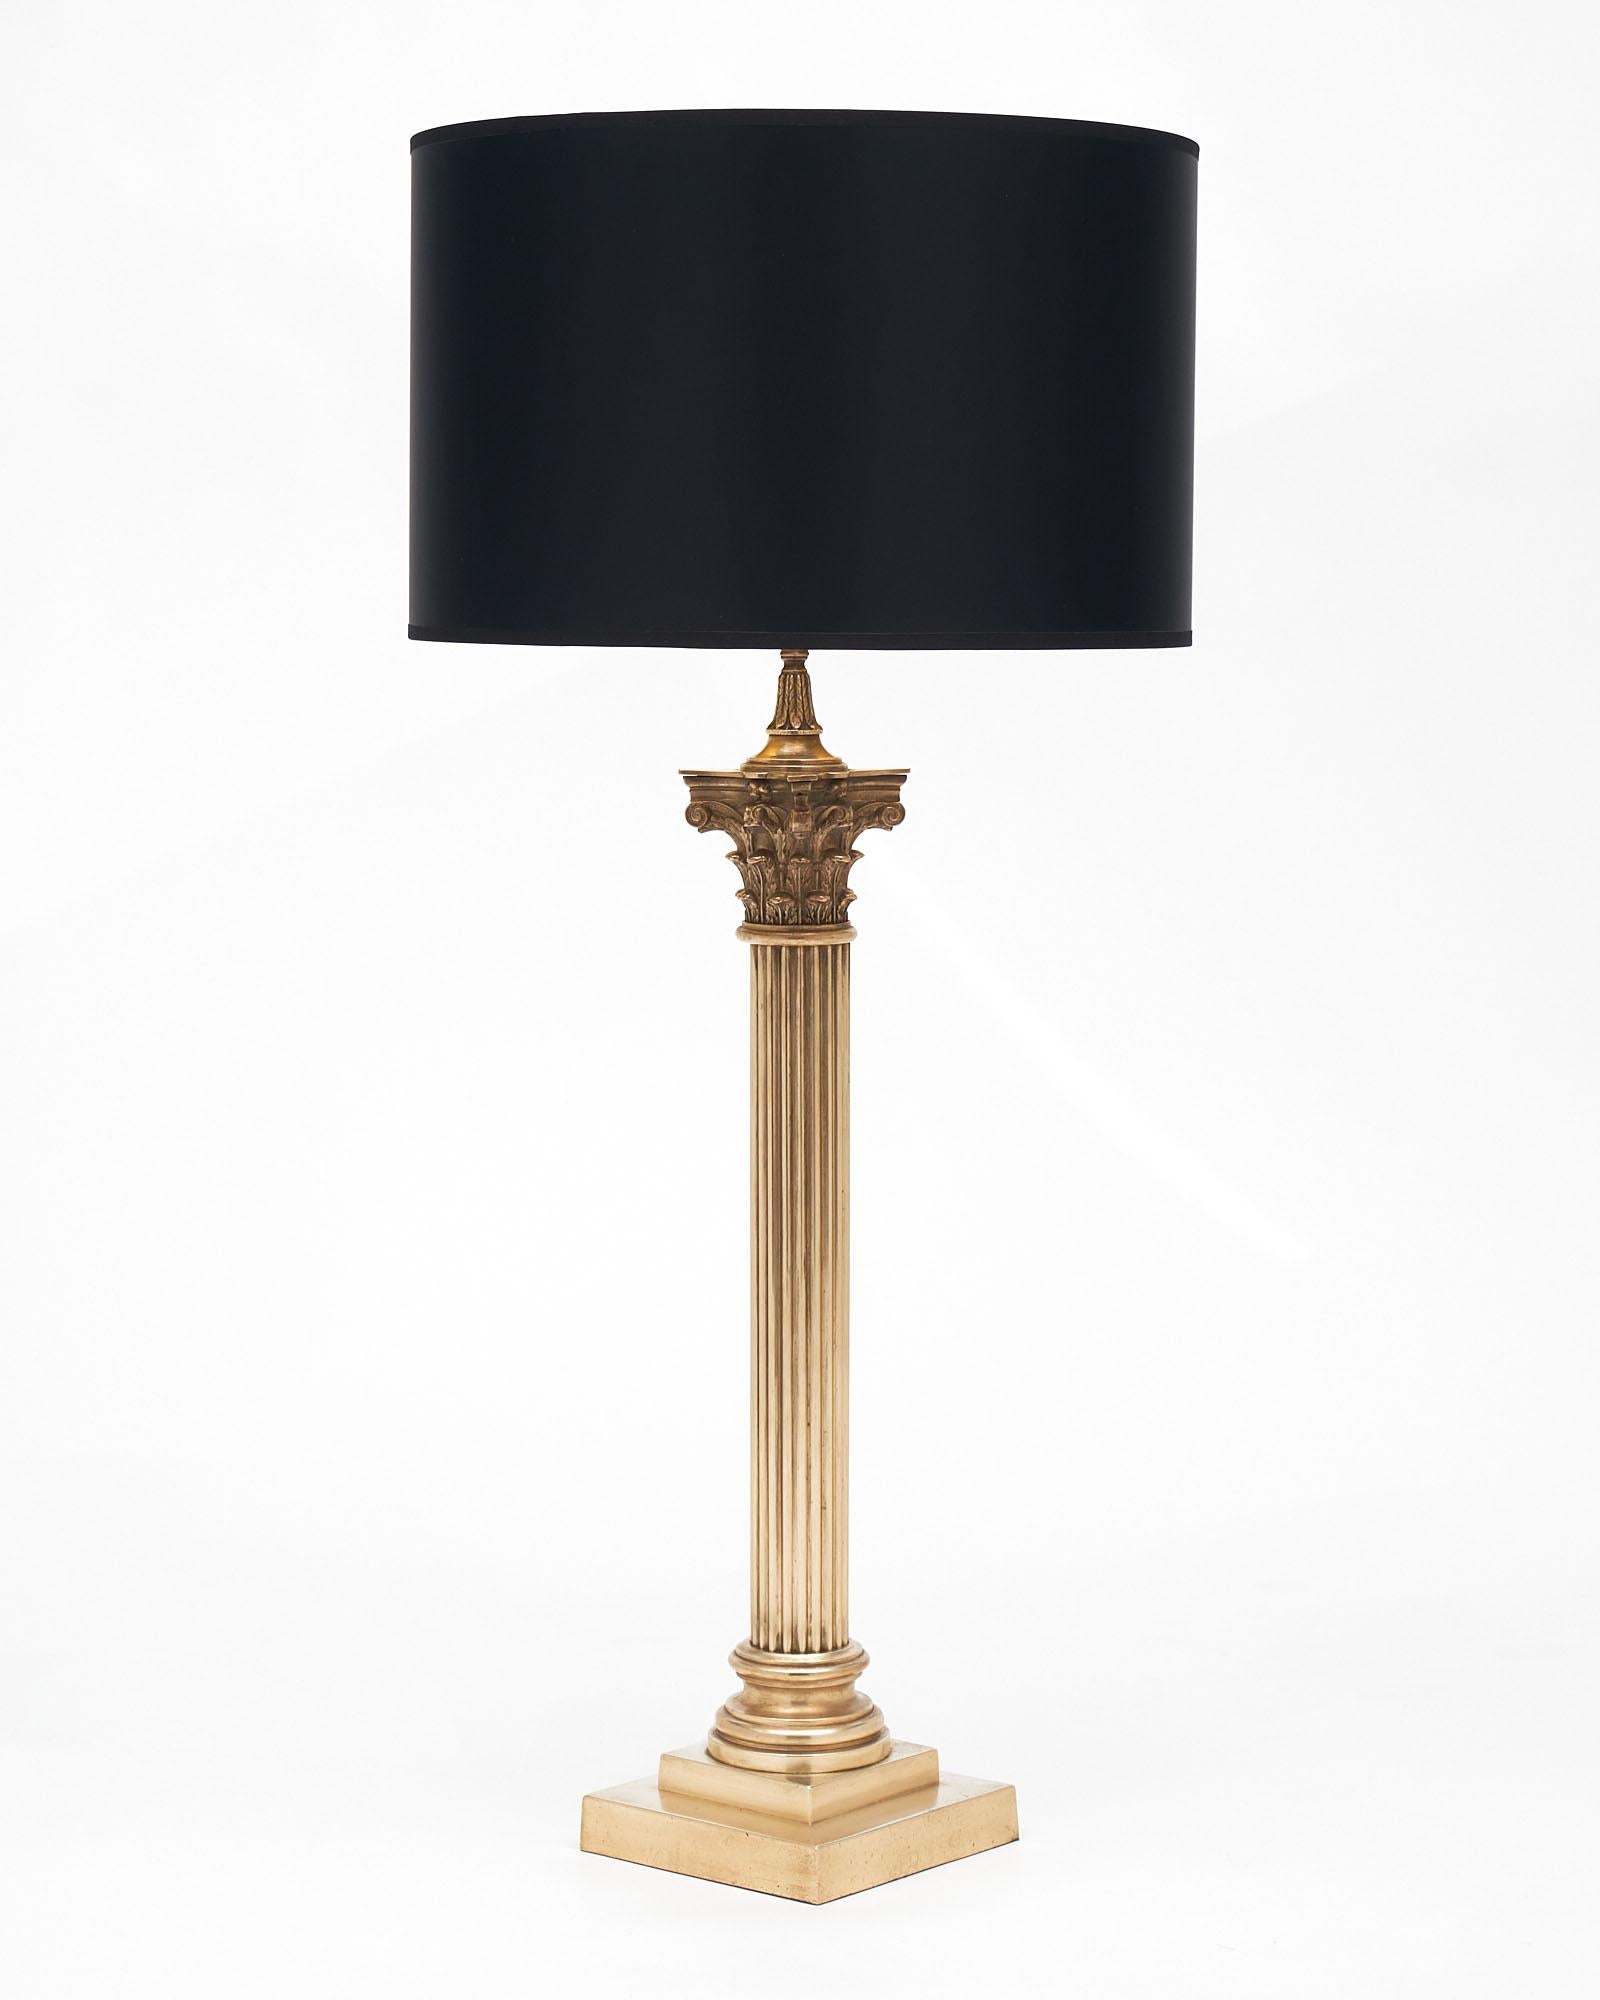 French Neoclassic brass lamp. This piece features a finely cast bronze ridged stem that rests on a gilt brass base.